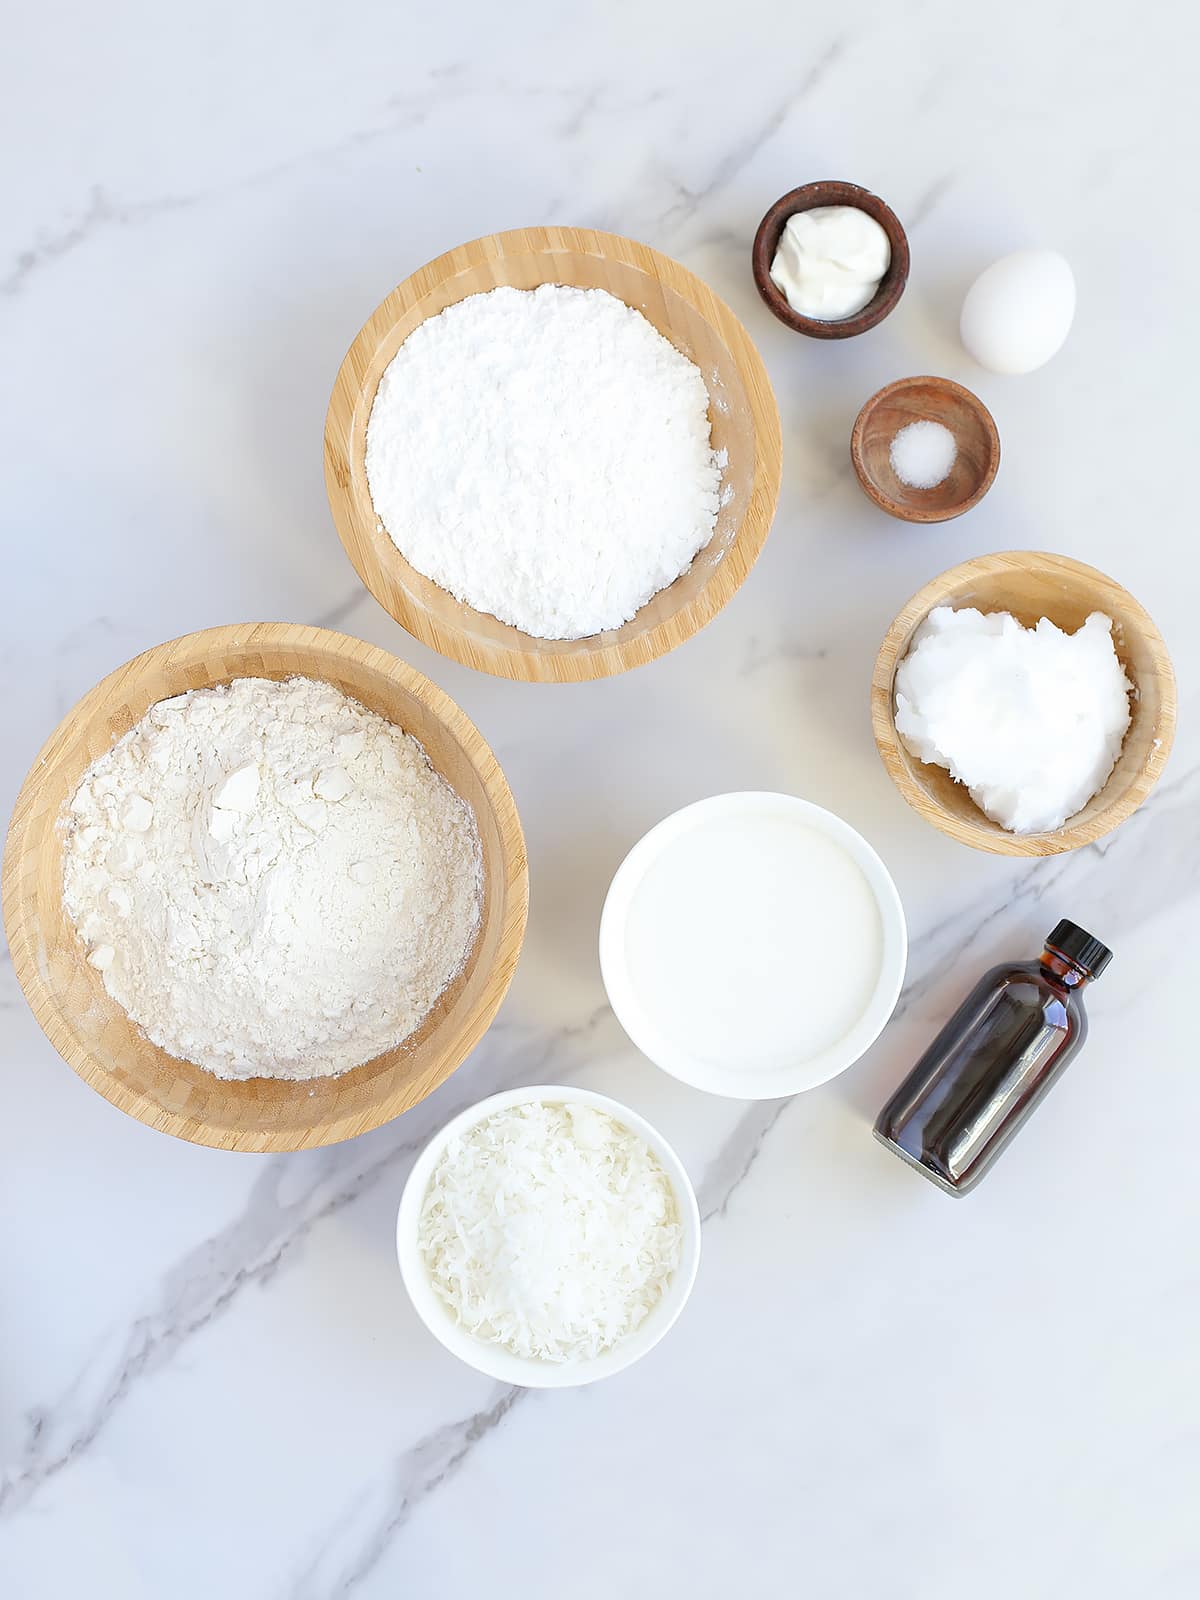 Ingredients to make coconut snowball cookies.